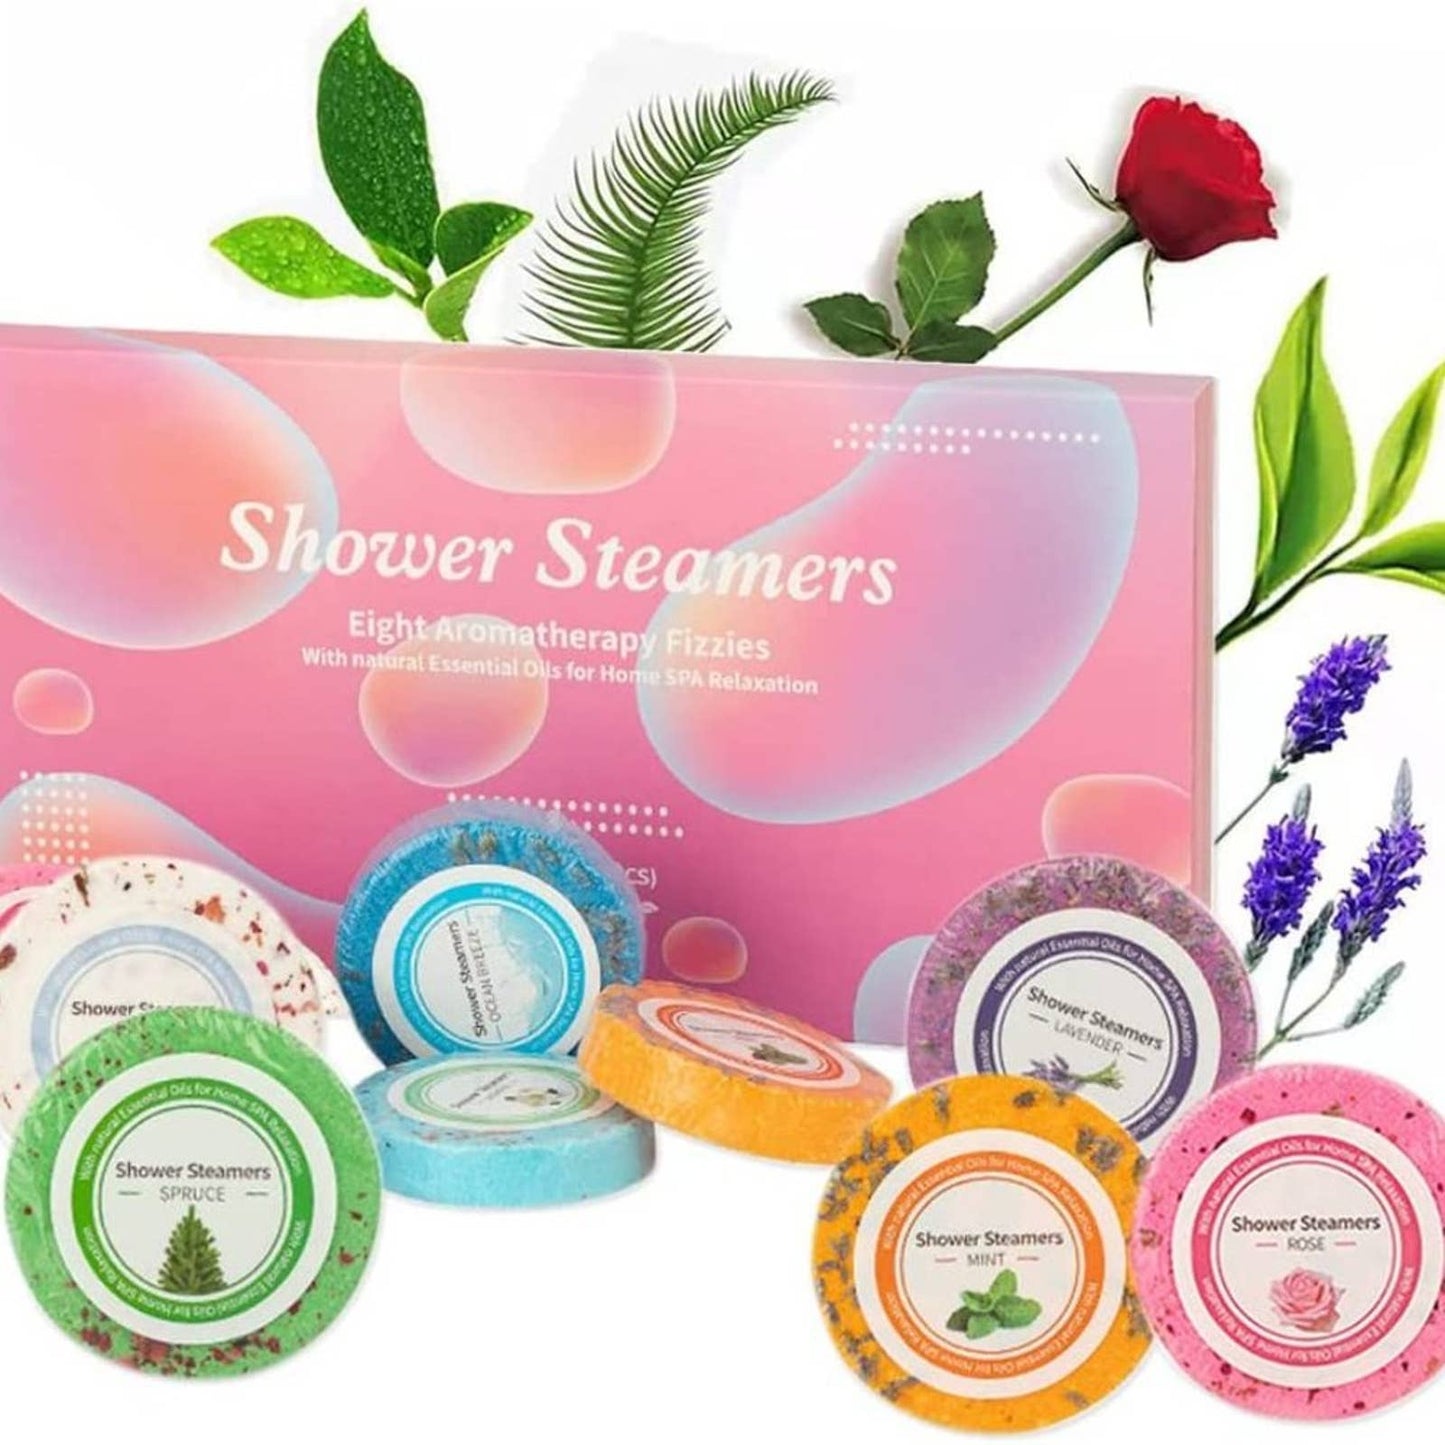 Shower Steamers Aromatherapy - 8 Pcs Bath Bombs with Essential Oils